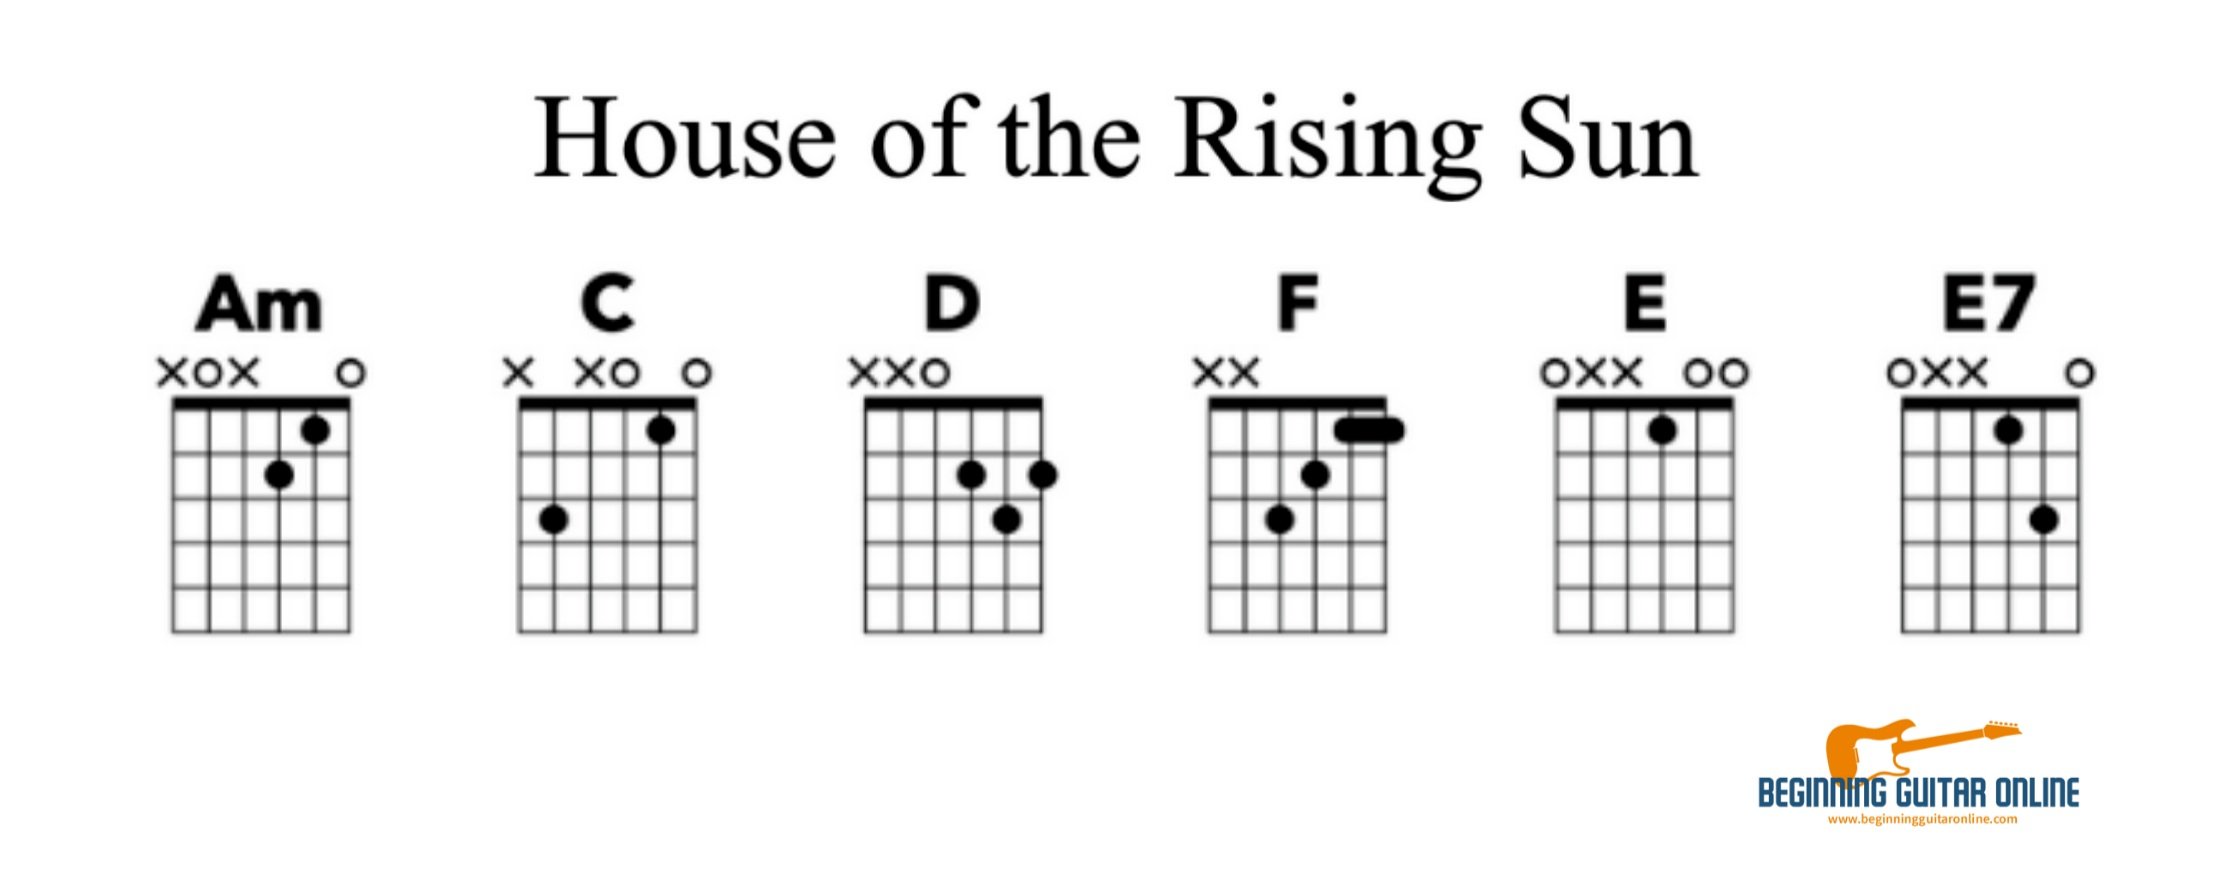 House Of The Rising Sun by Southern American Folksong - Guitar Chords/Lyrics  - Guitar Instructor